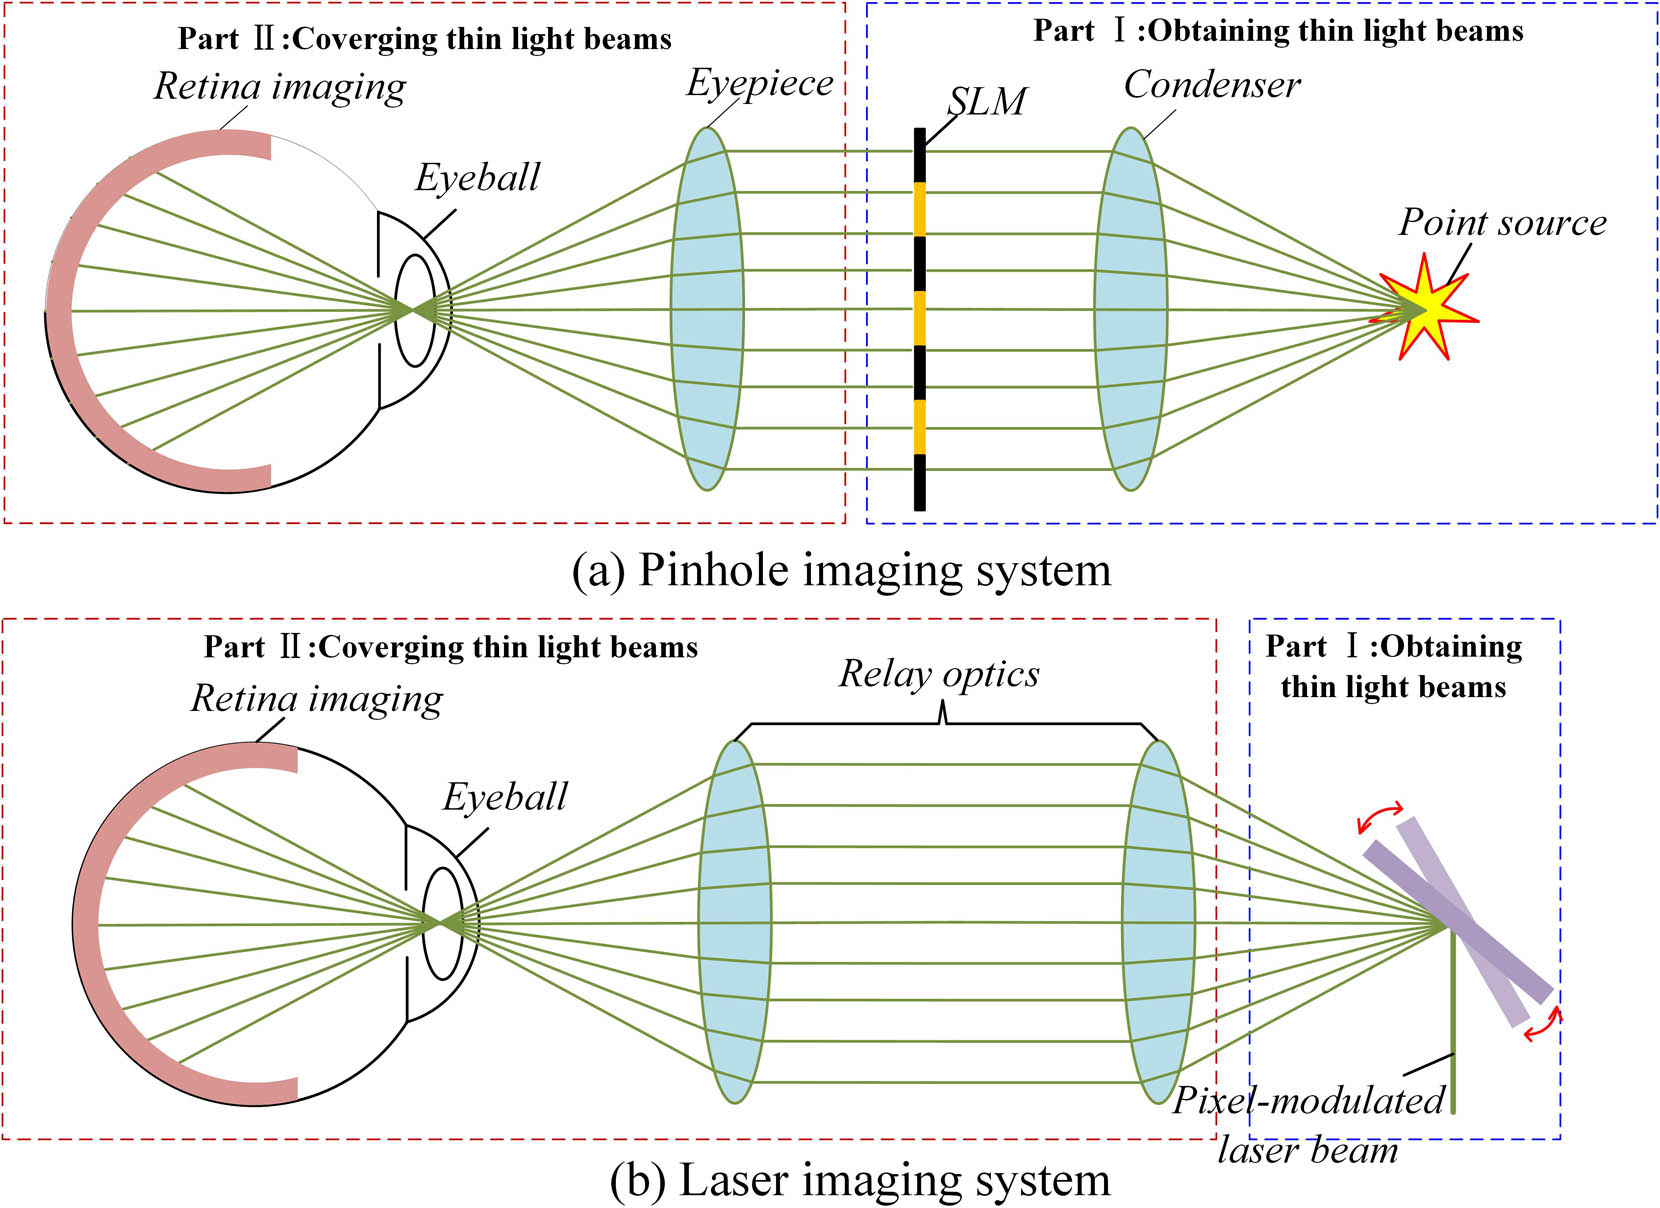 Principles of VRD systems: (a) pinhole and (b) laser imaging systems.